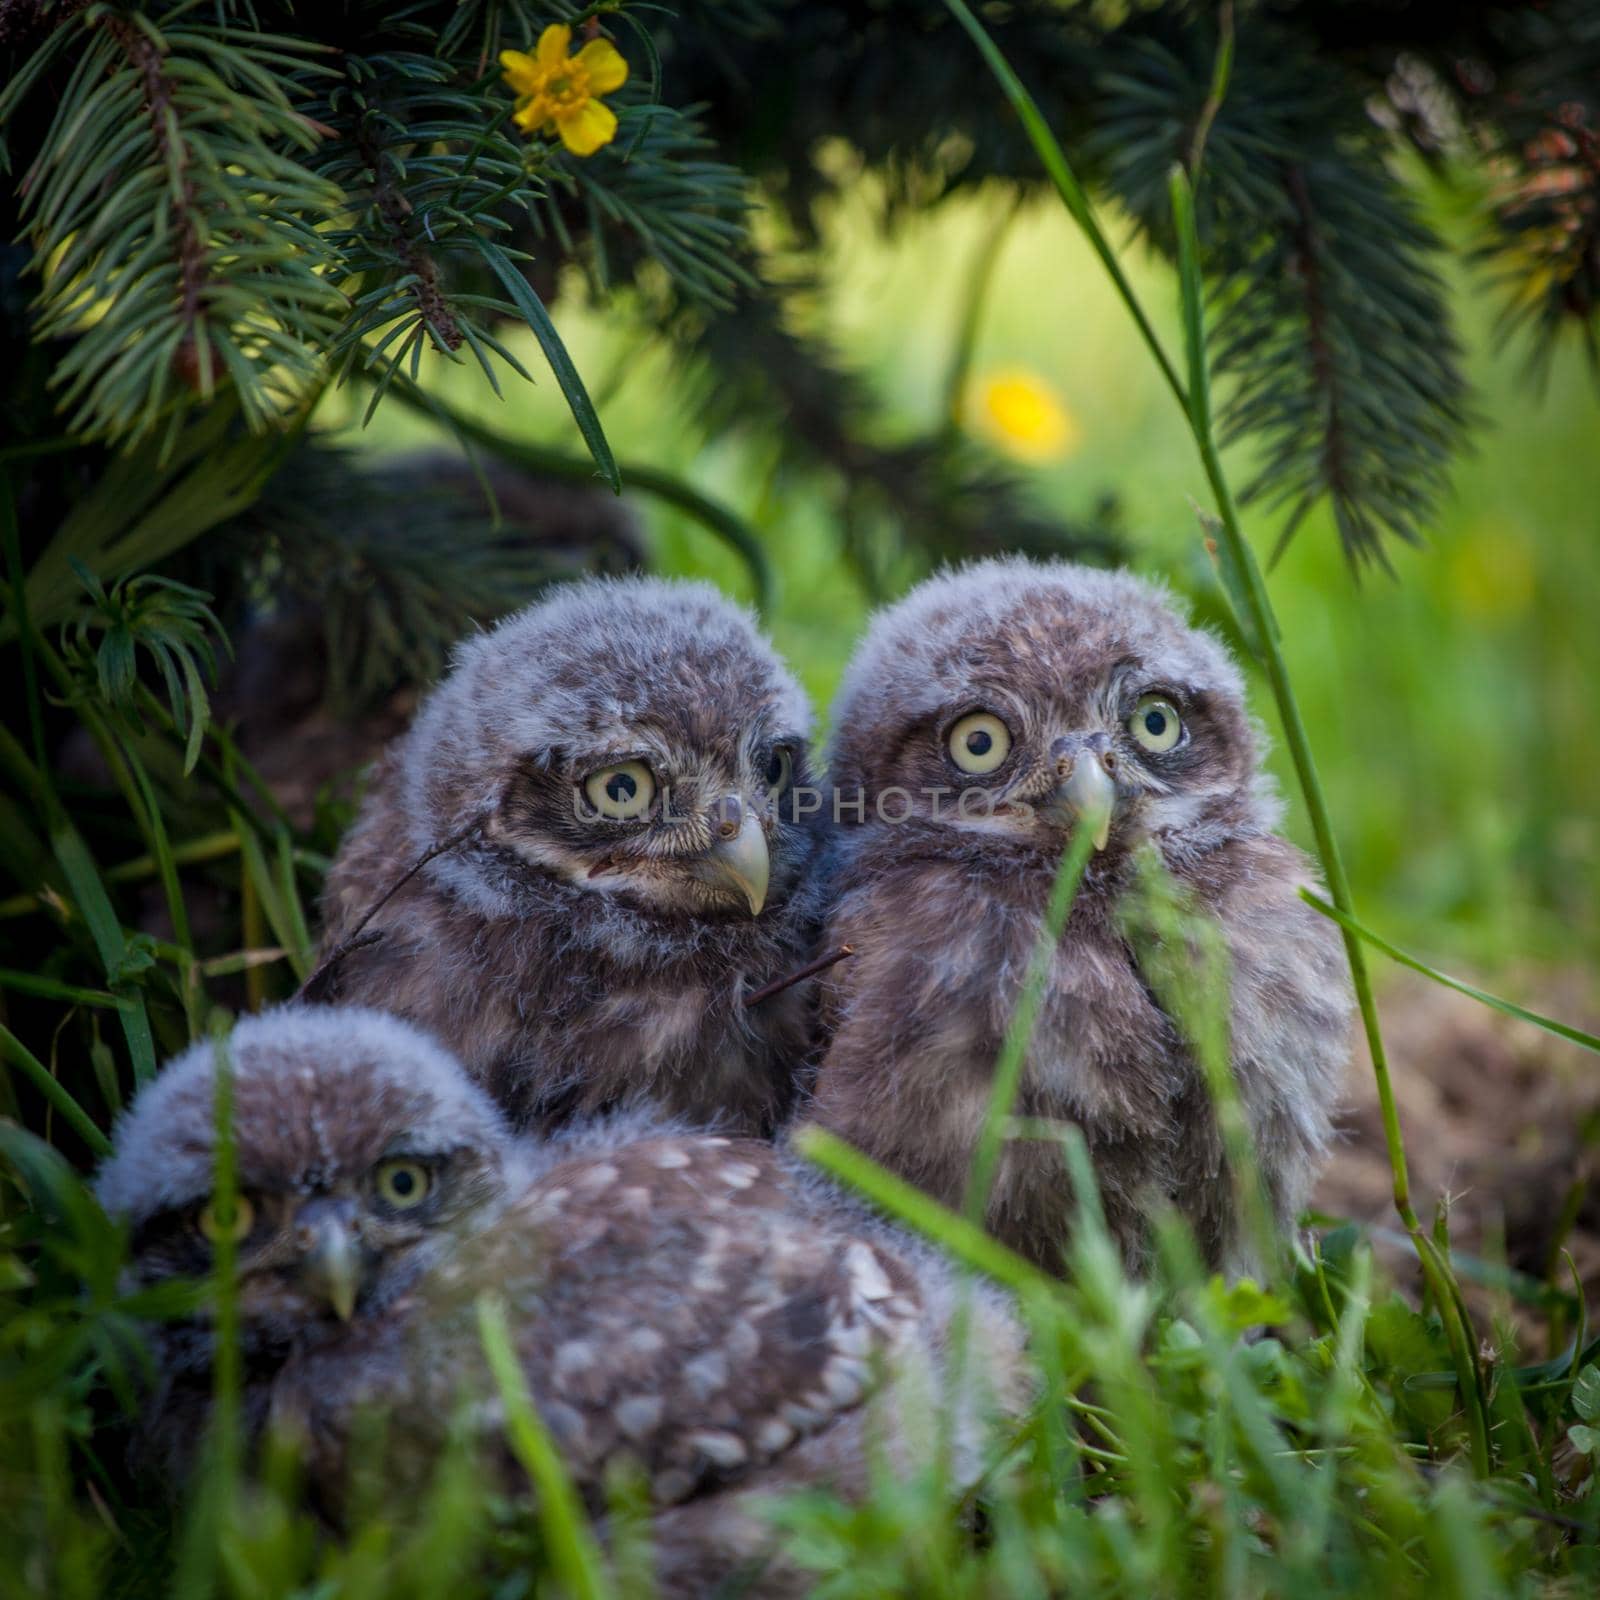 Little Owl Babies, 5 weeks old, on grass by RosaJay